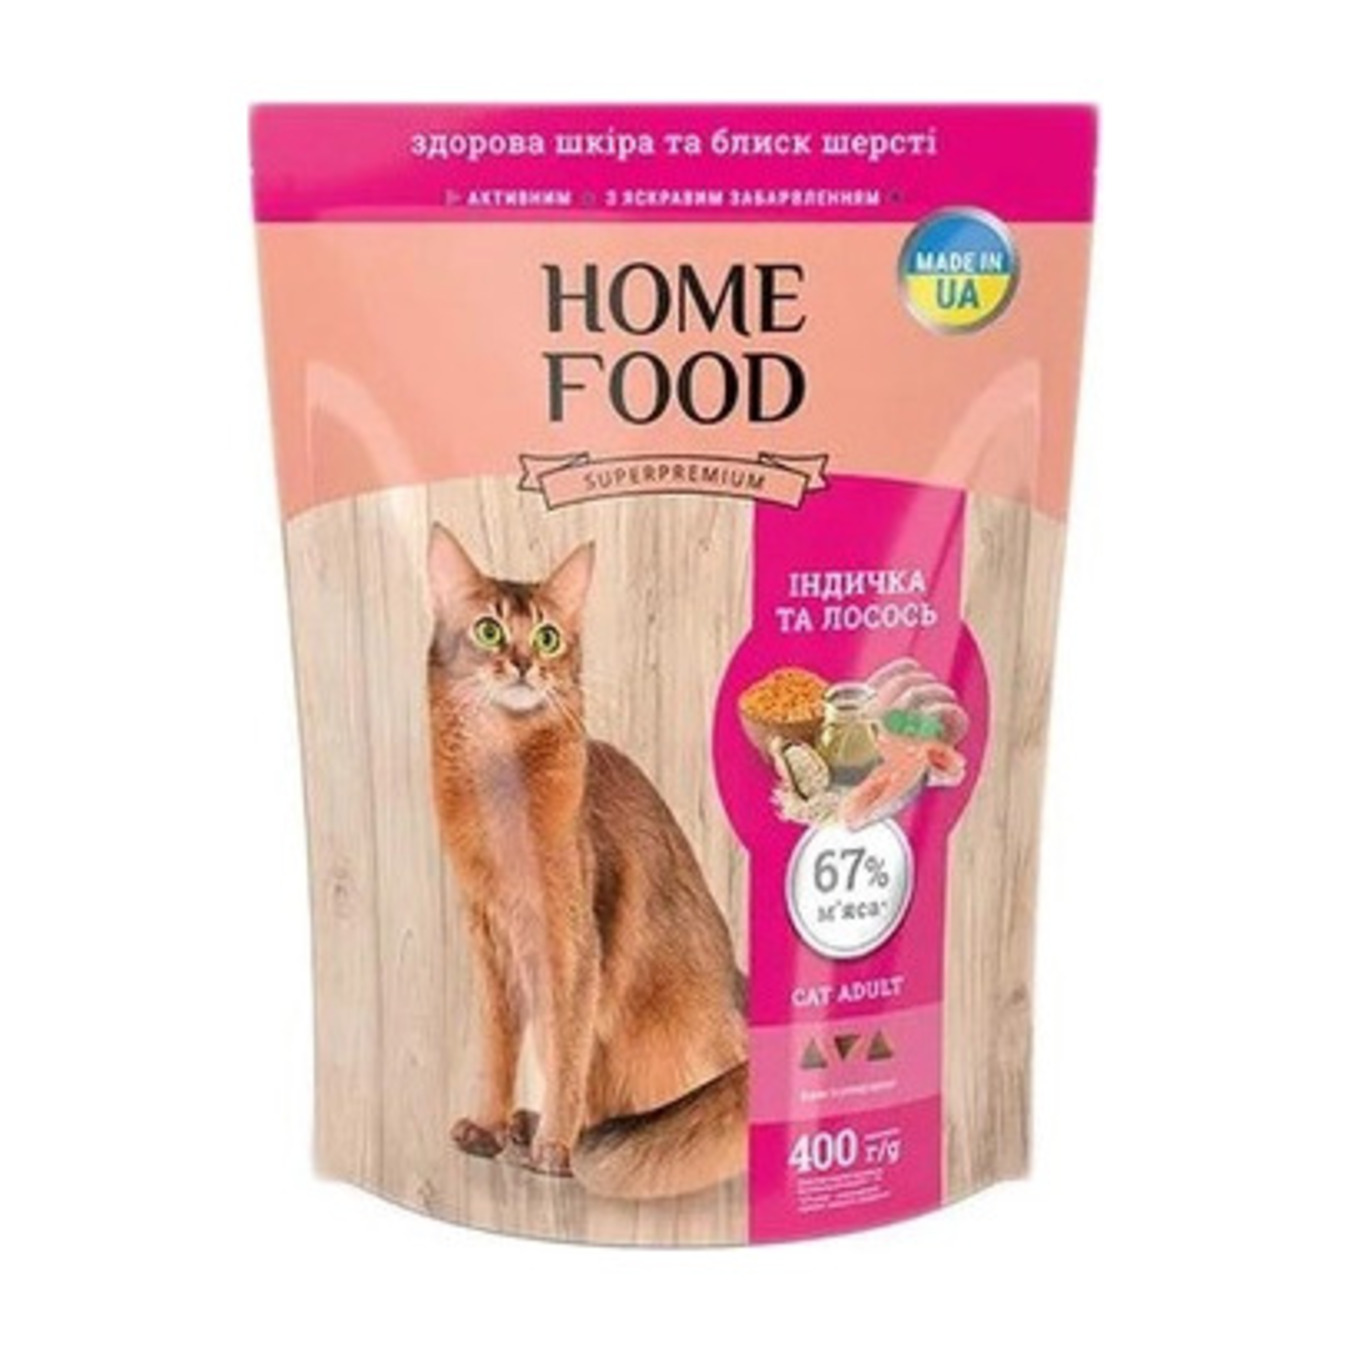 Cat food Home Food healthy skin and shiny coat dry Turkey and salmon 400g